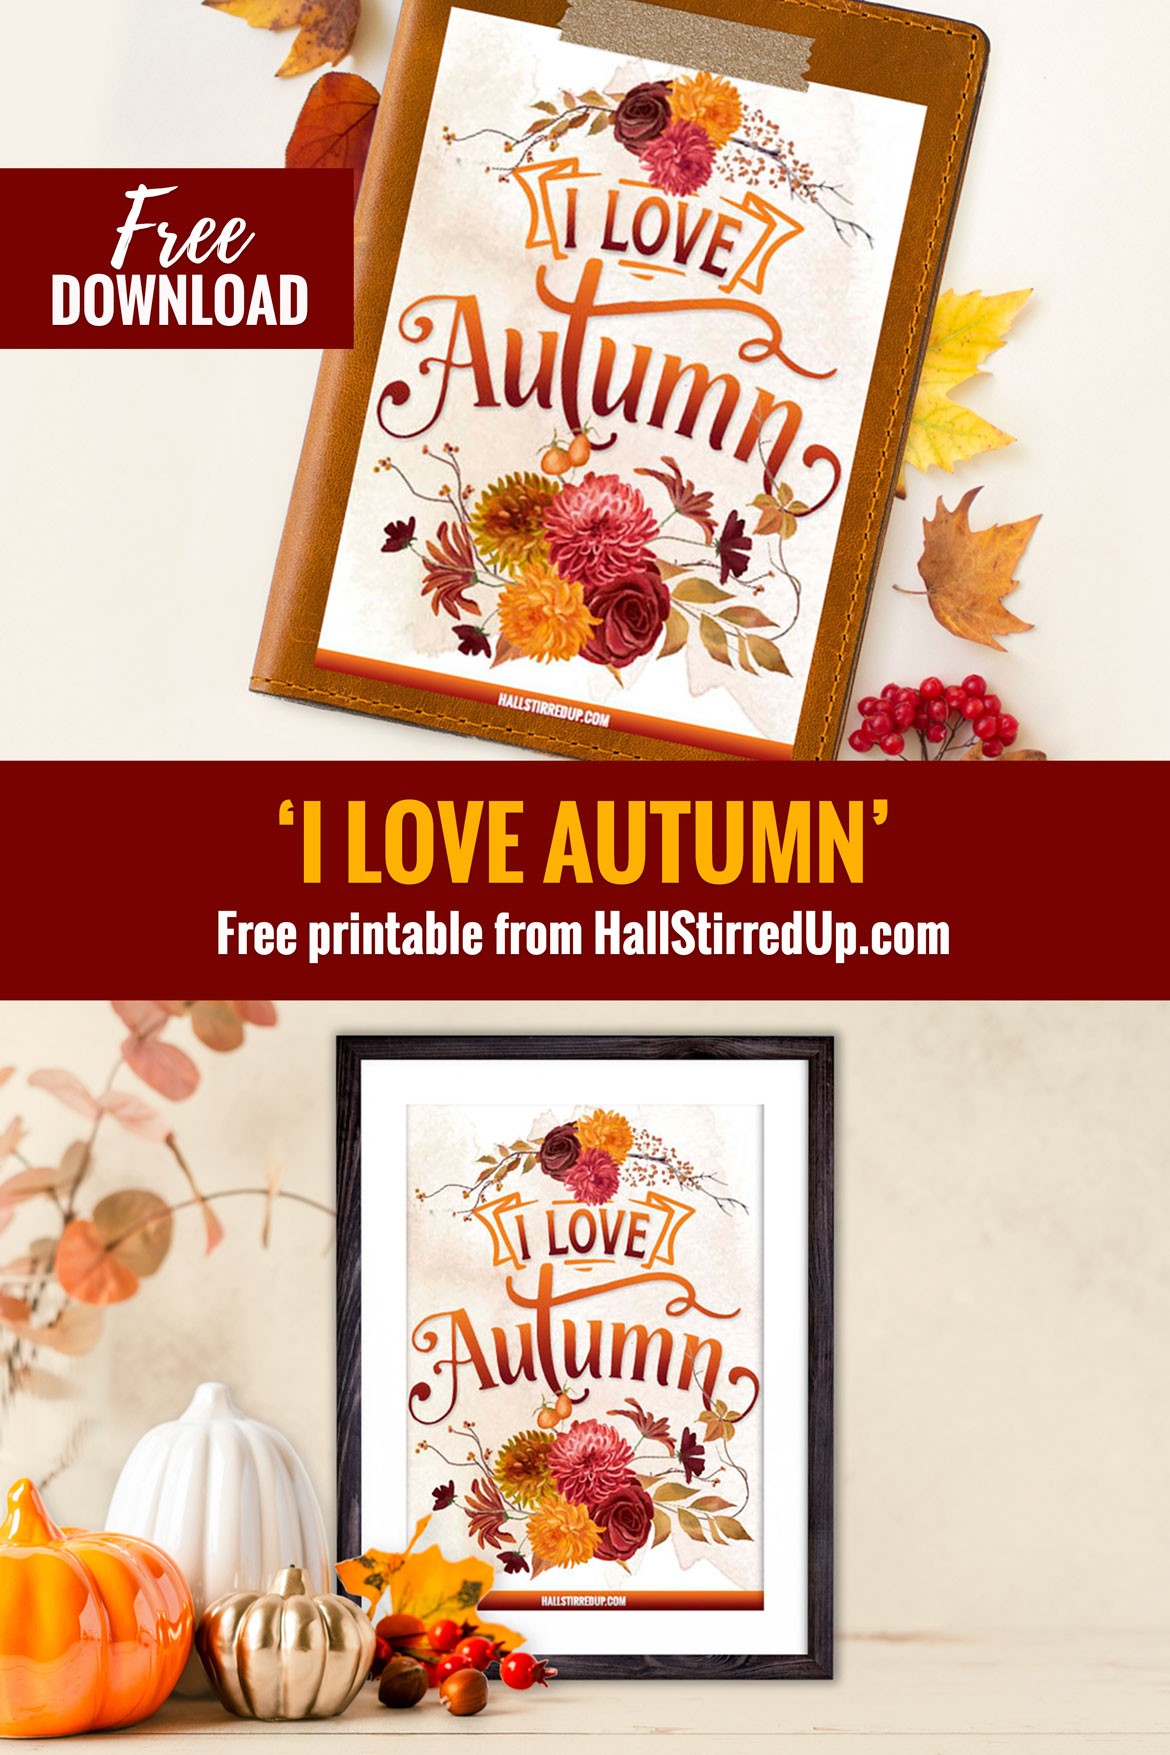 All the fall feels and a pretty 'I love Autumn' free printable